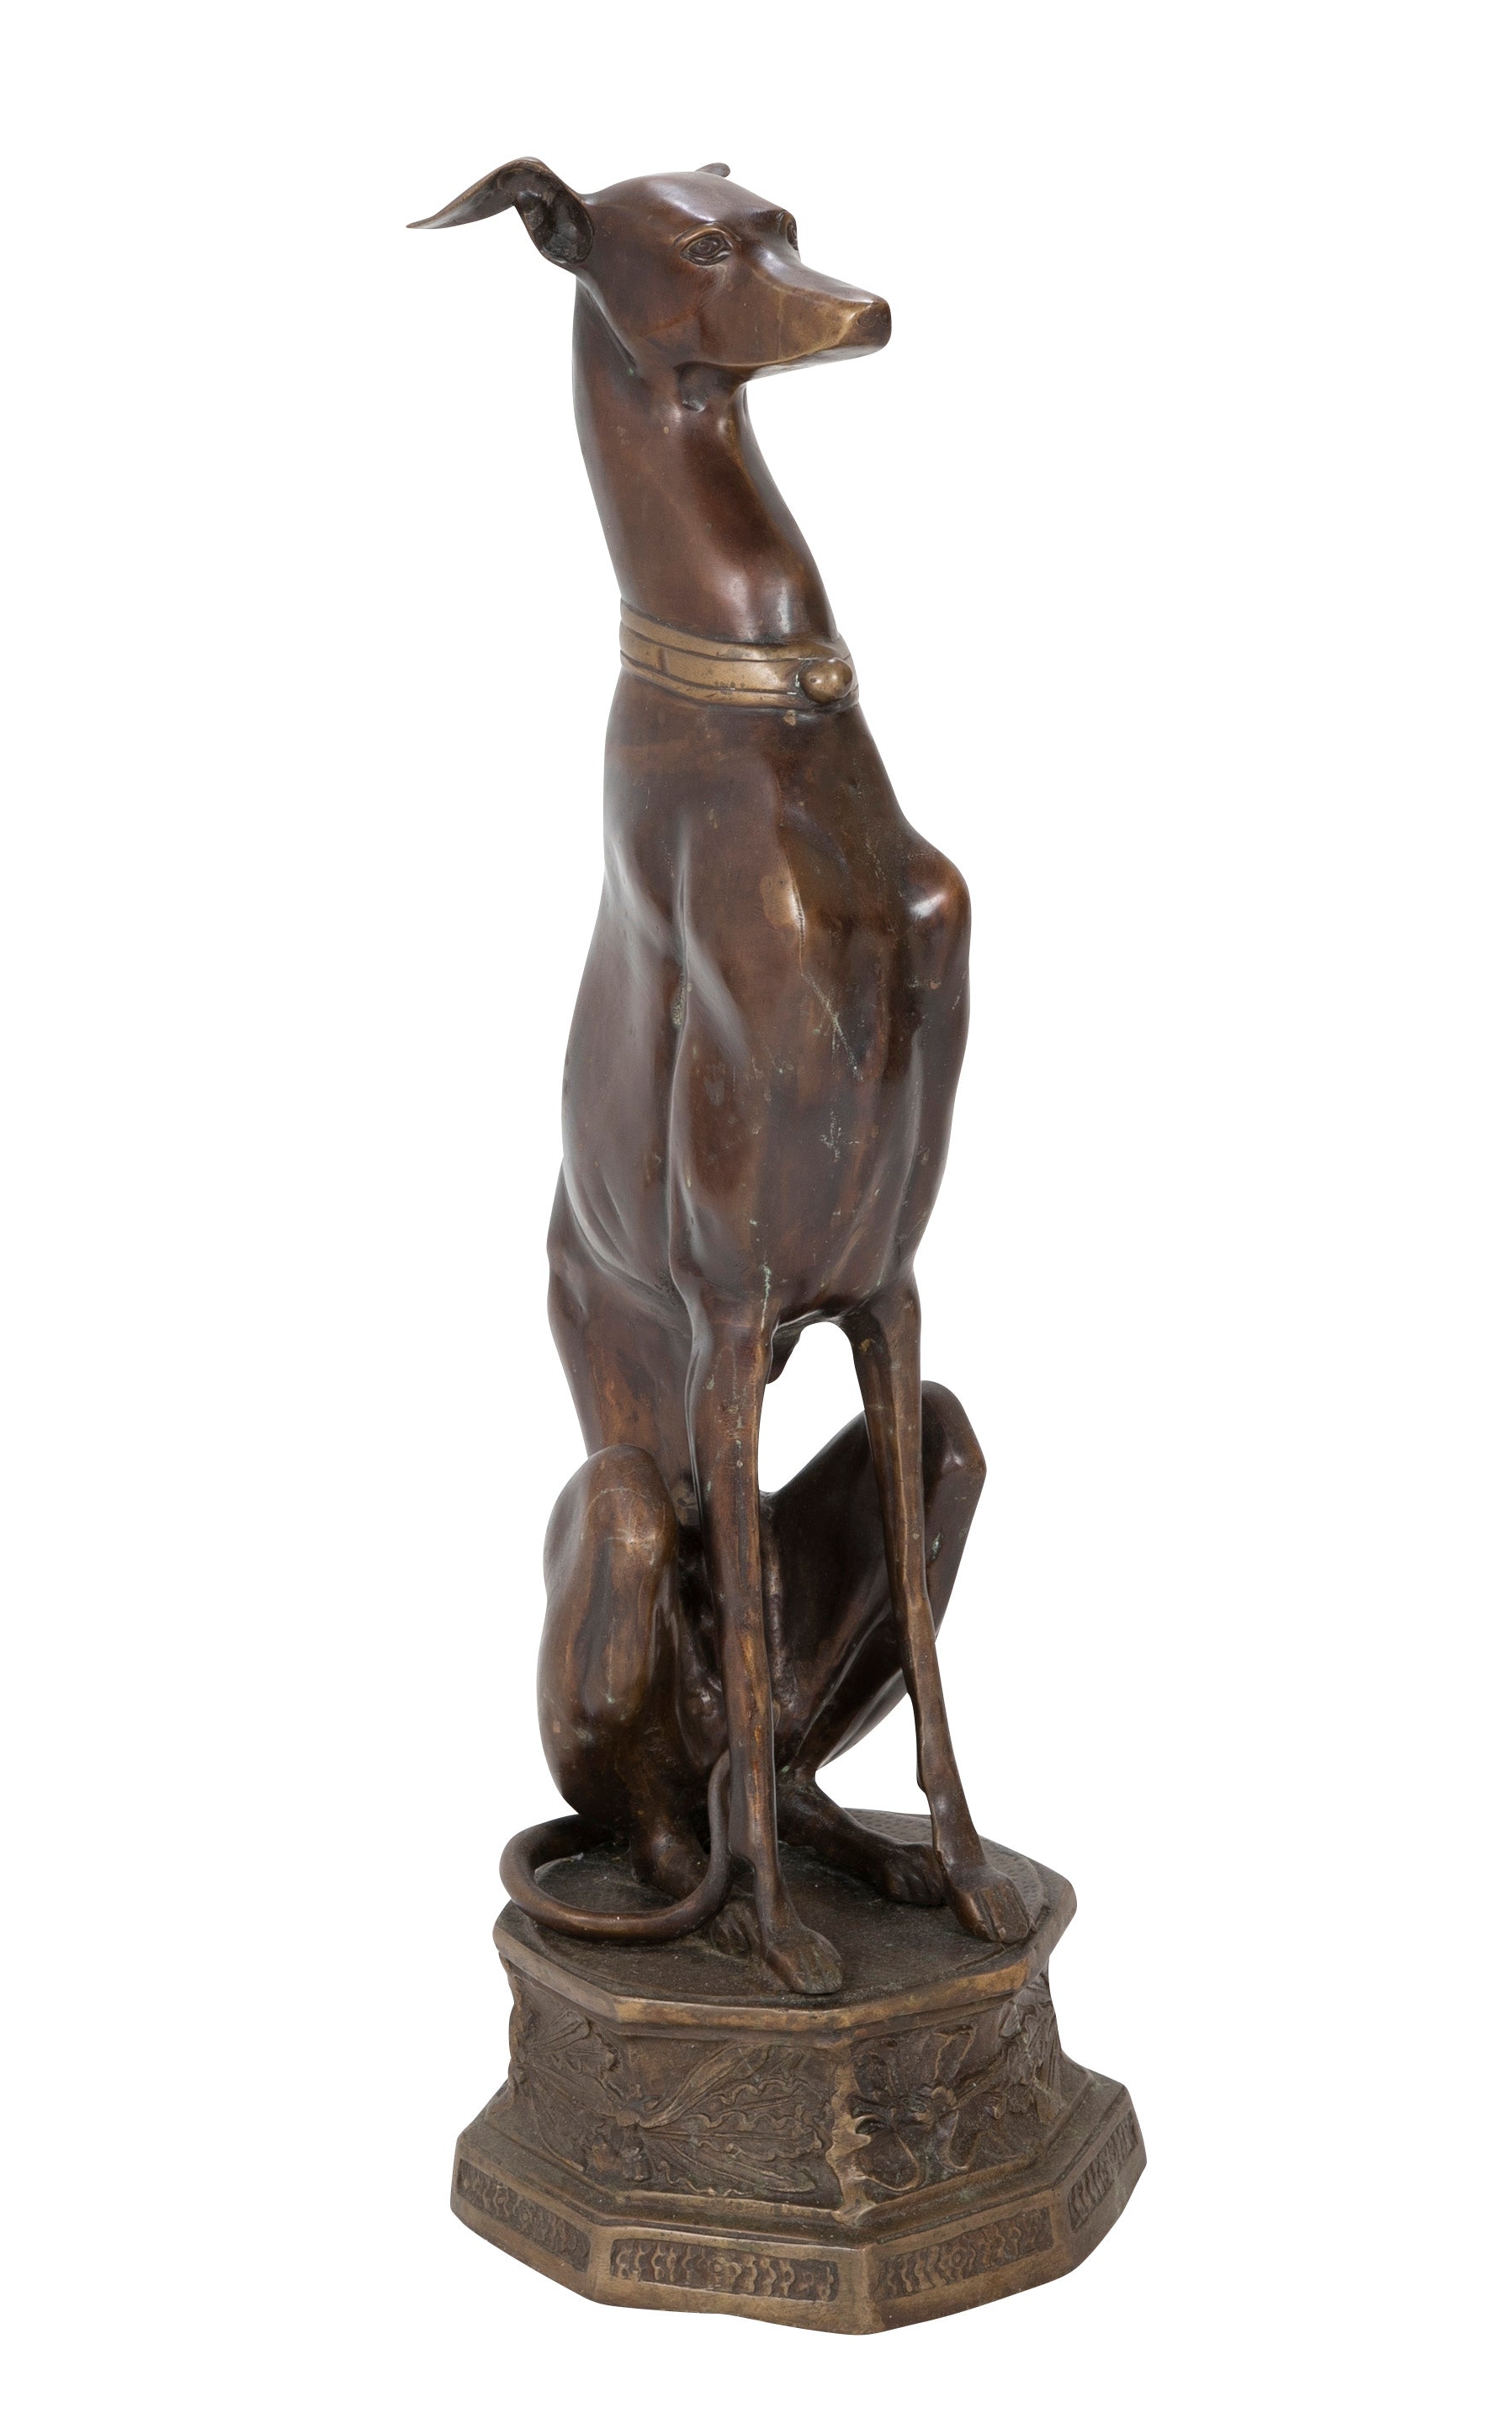 Bronze Figure of a Whippet or Greyhound